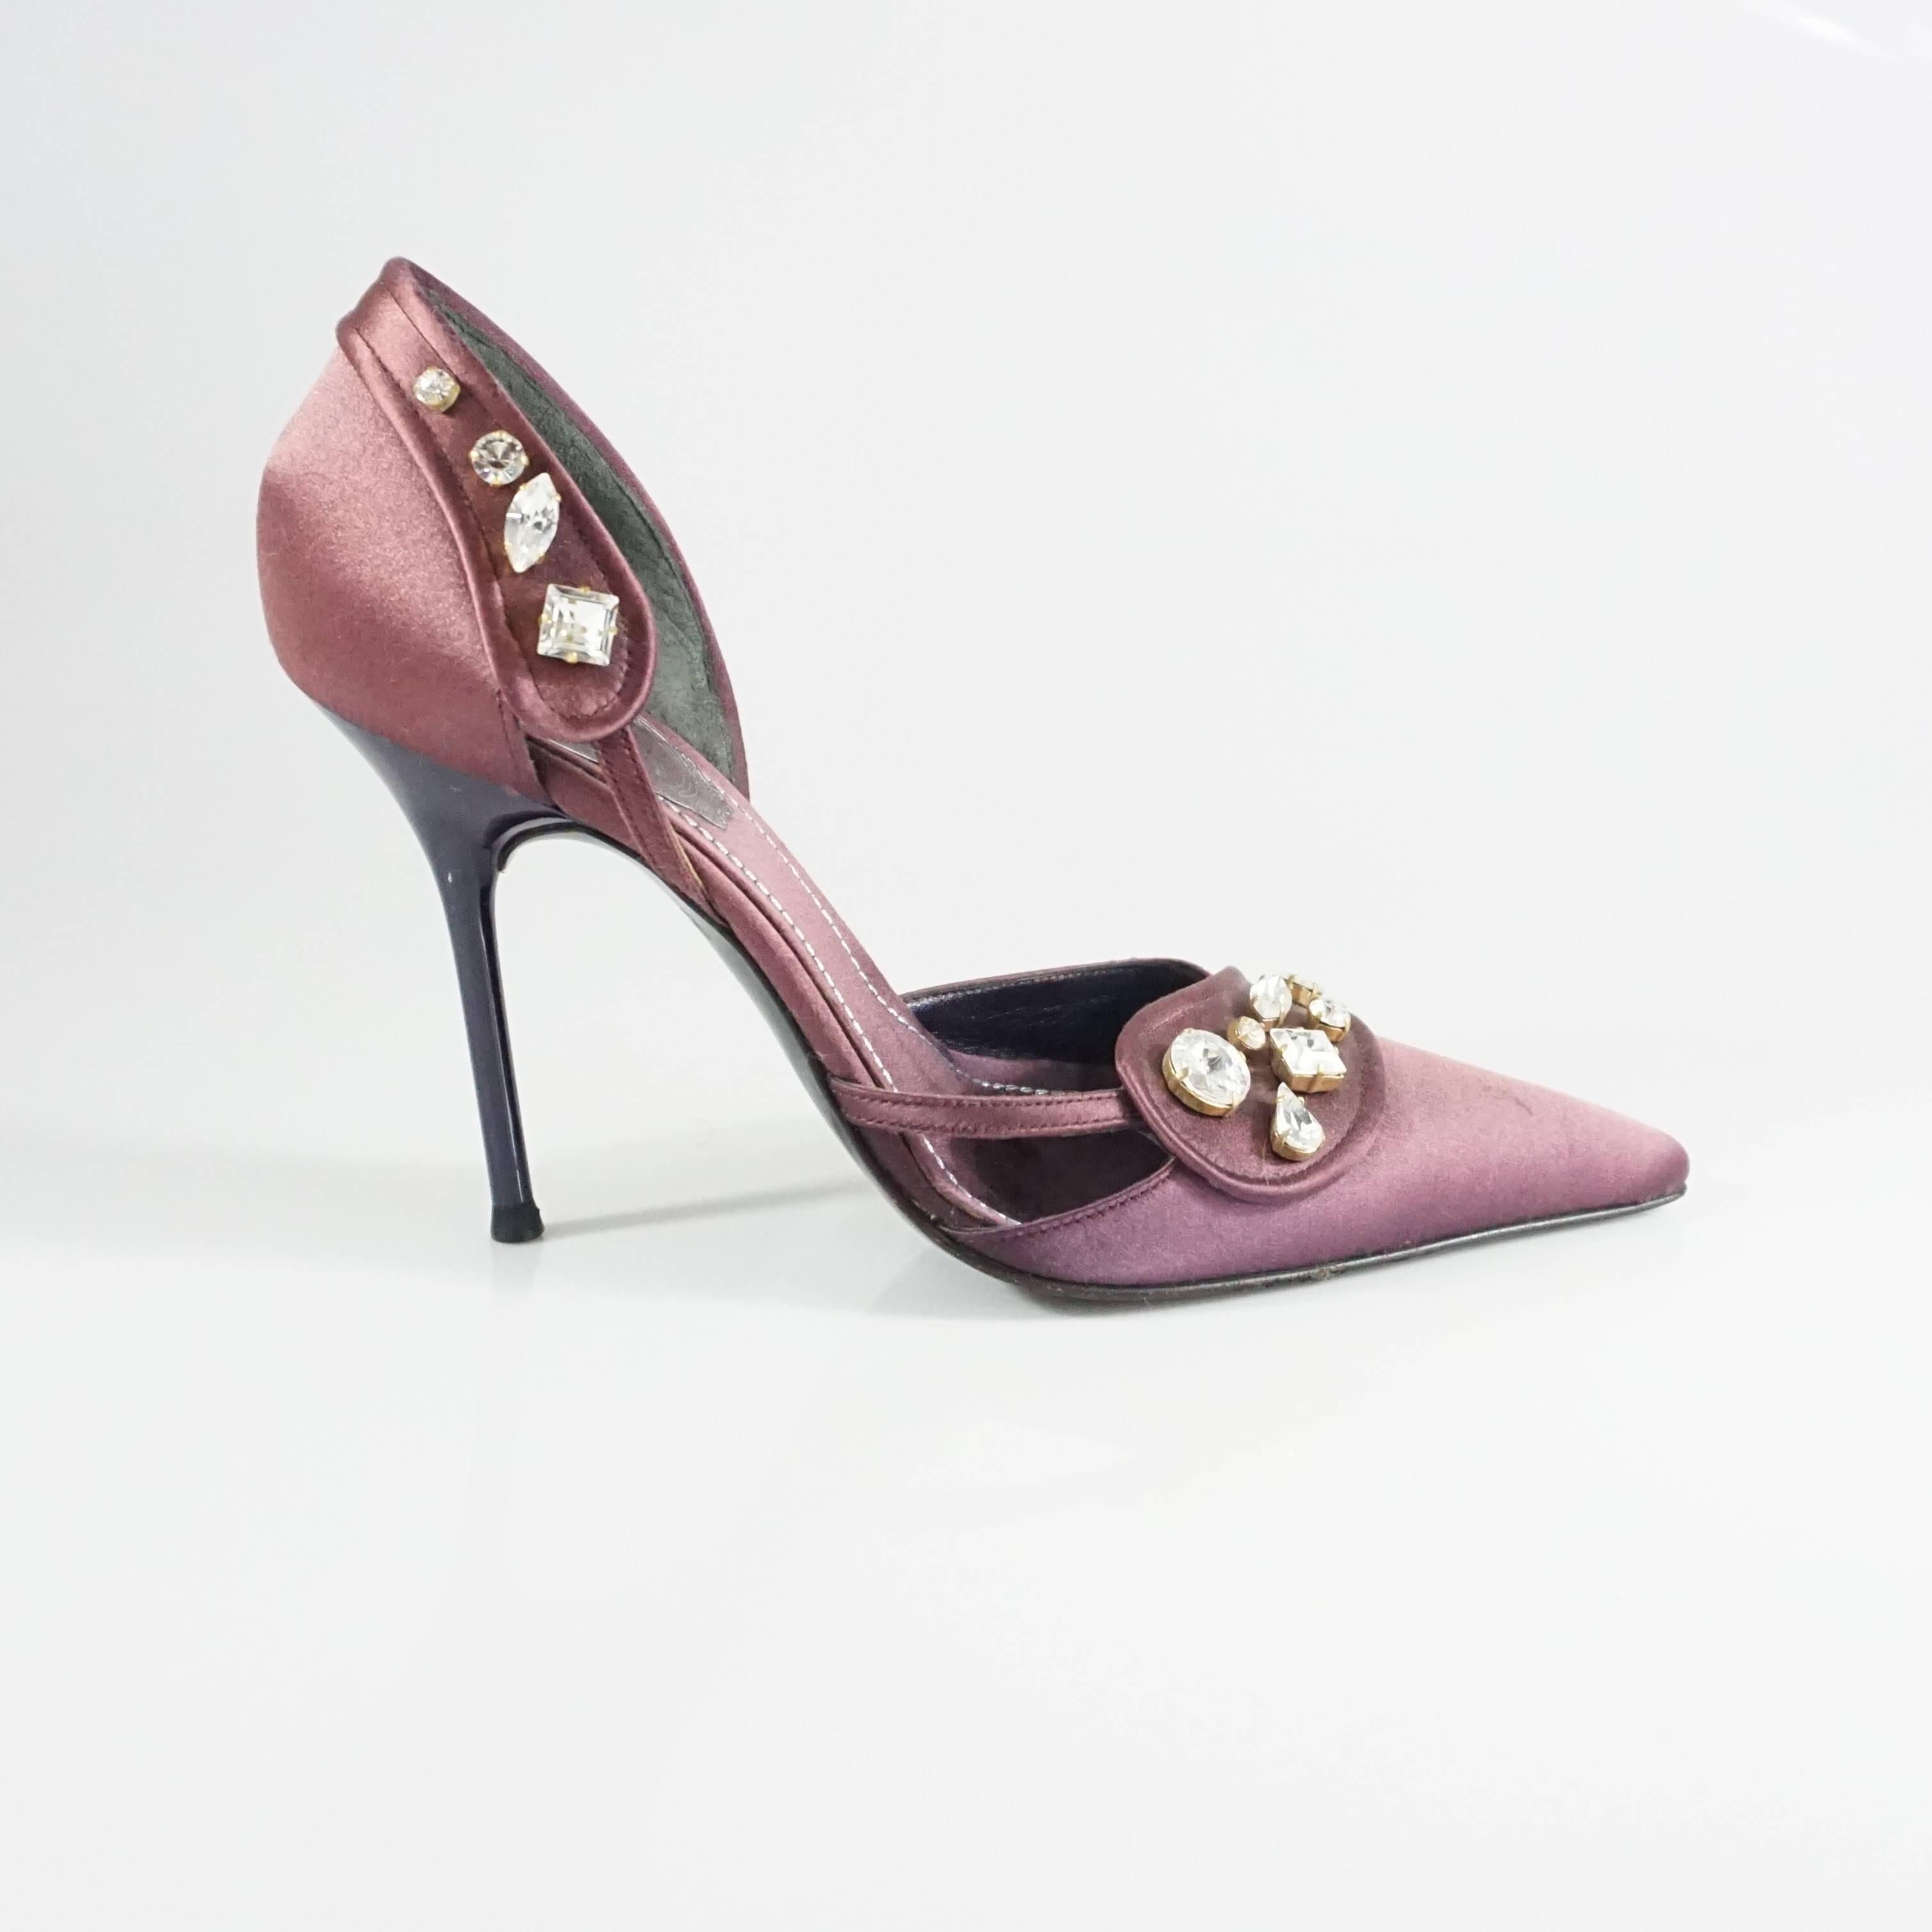 These Rene Caovilla eggplant satin heels are pointed toe with large rhinestones clusters on it. They are in good condition with a few minor scratches on the satin and minimal botton wear. Size 35.5. 

Heel Height: 4"